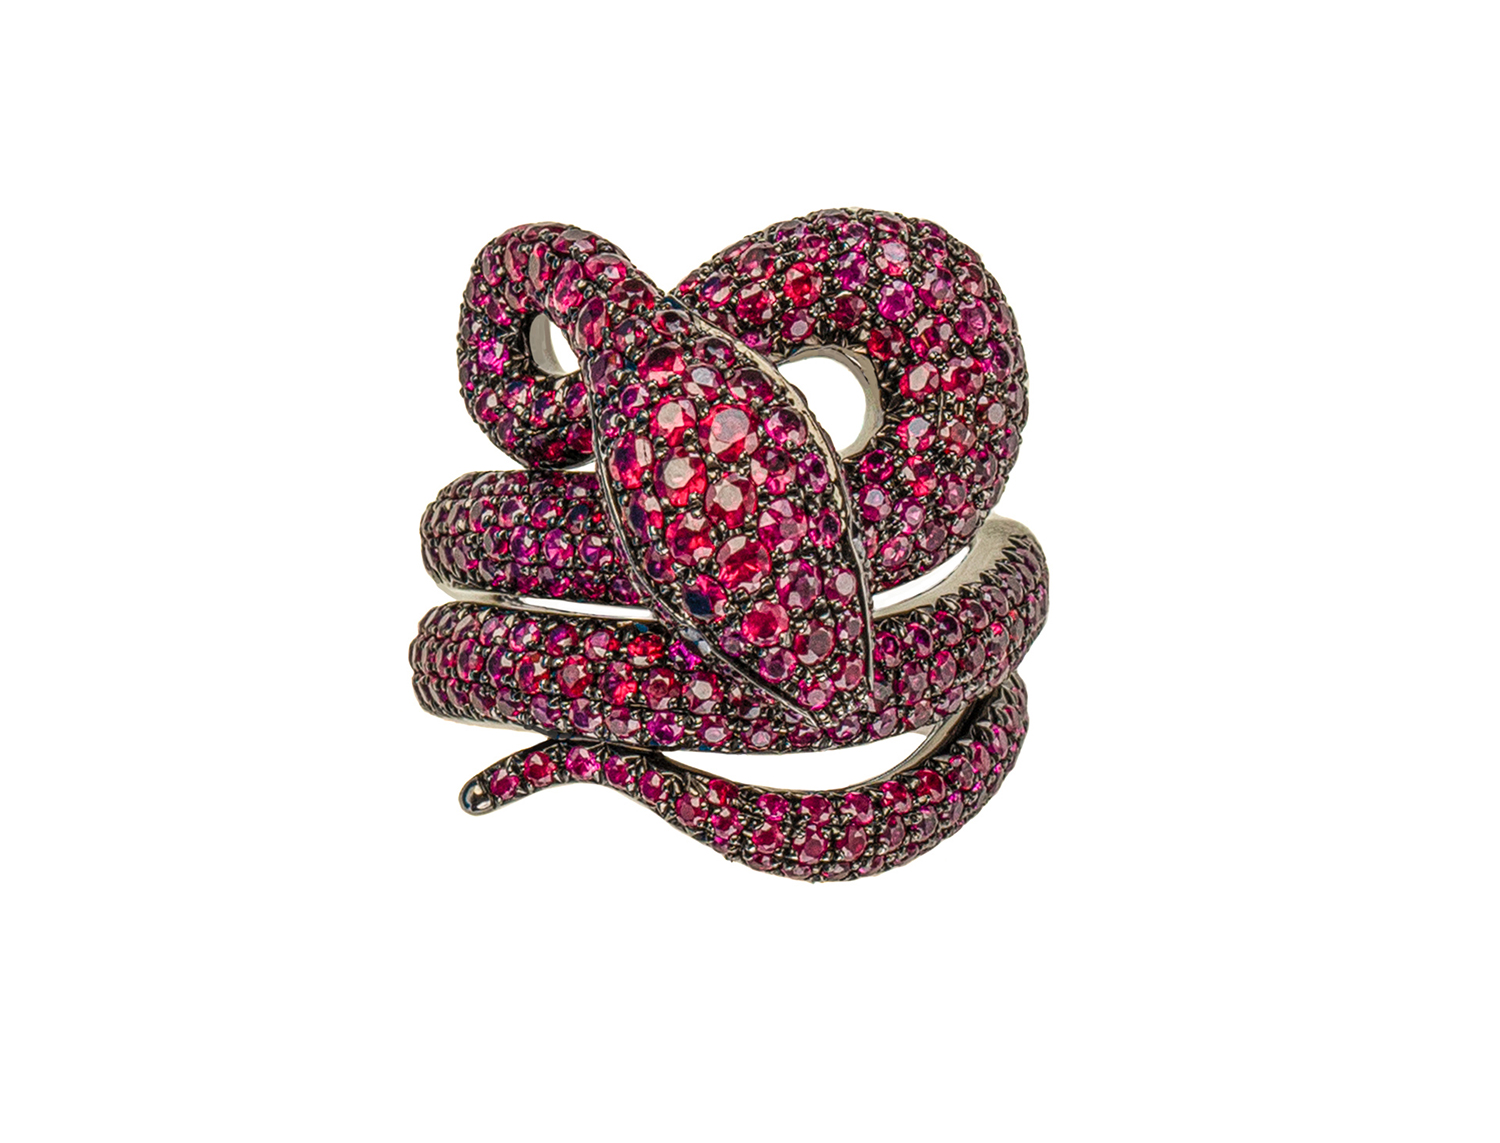 Rubies and Black Diamonds Snake Ring - Stefere